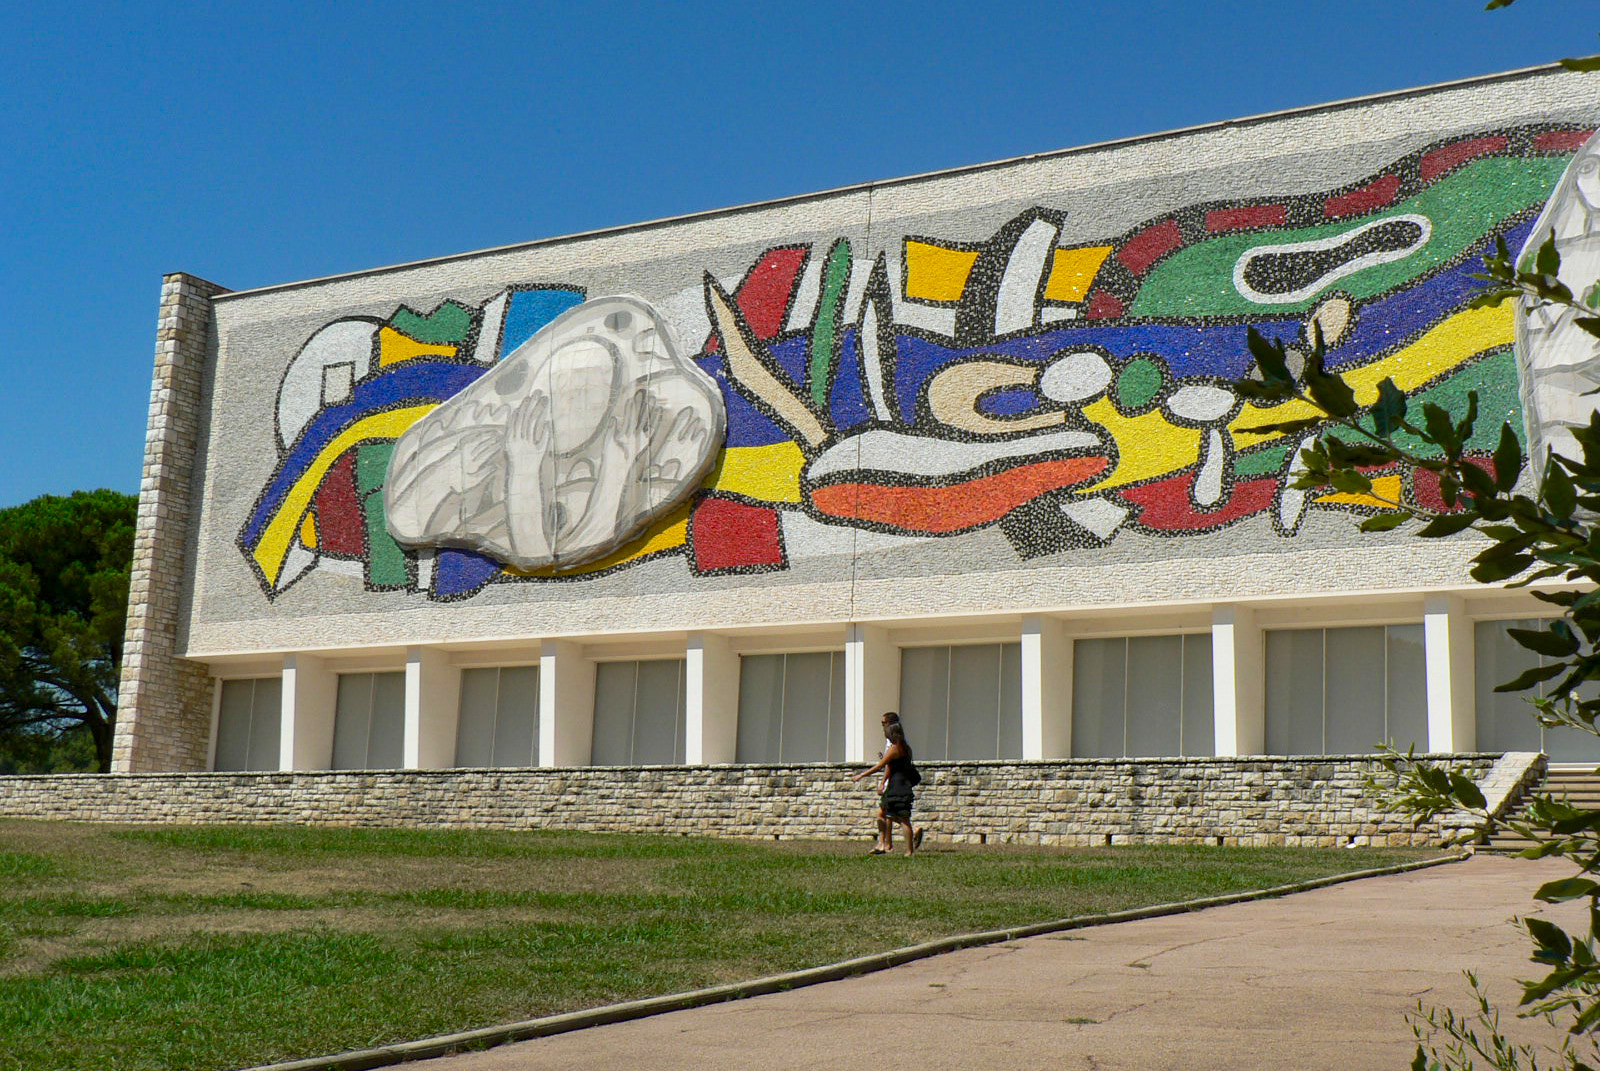 Biot Musée National Fernand Léger © Ecce Art - licence [CC BY-SA 3.0] from Wikimedia Commons